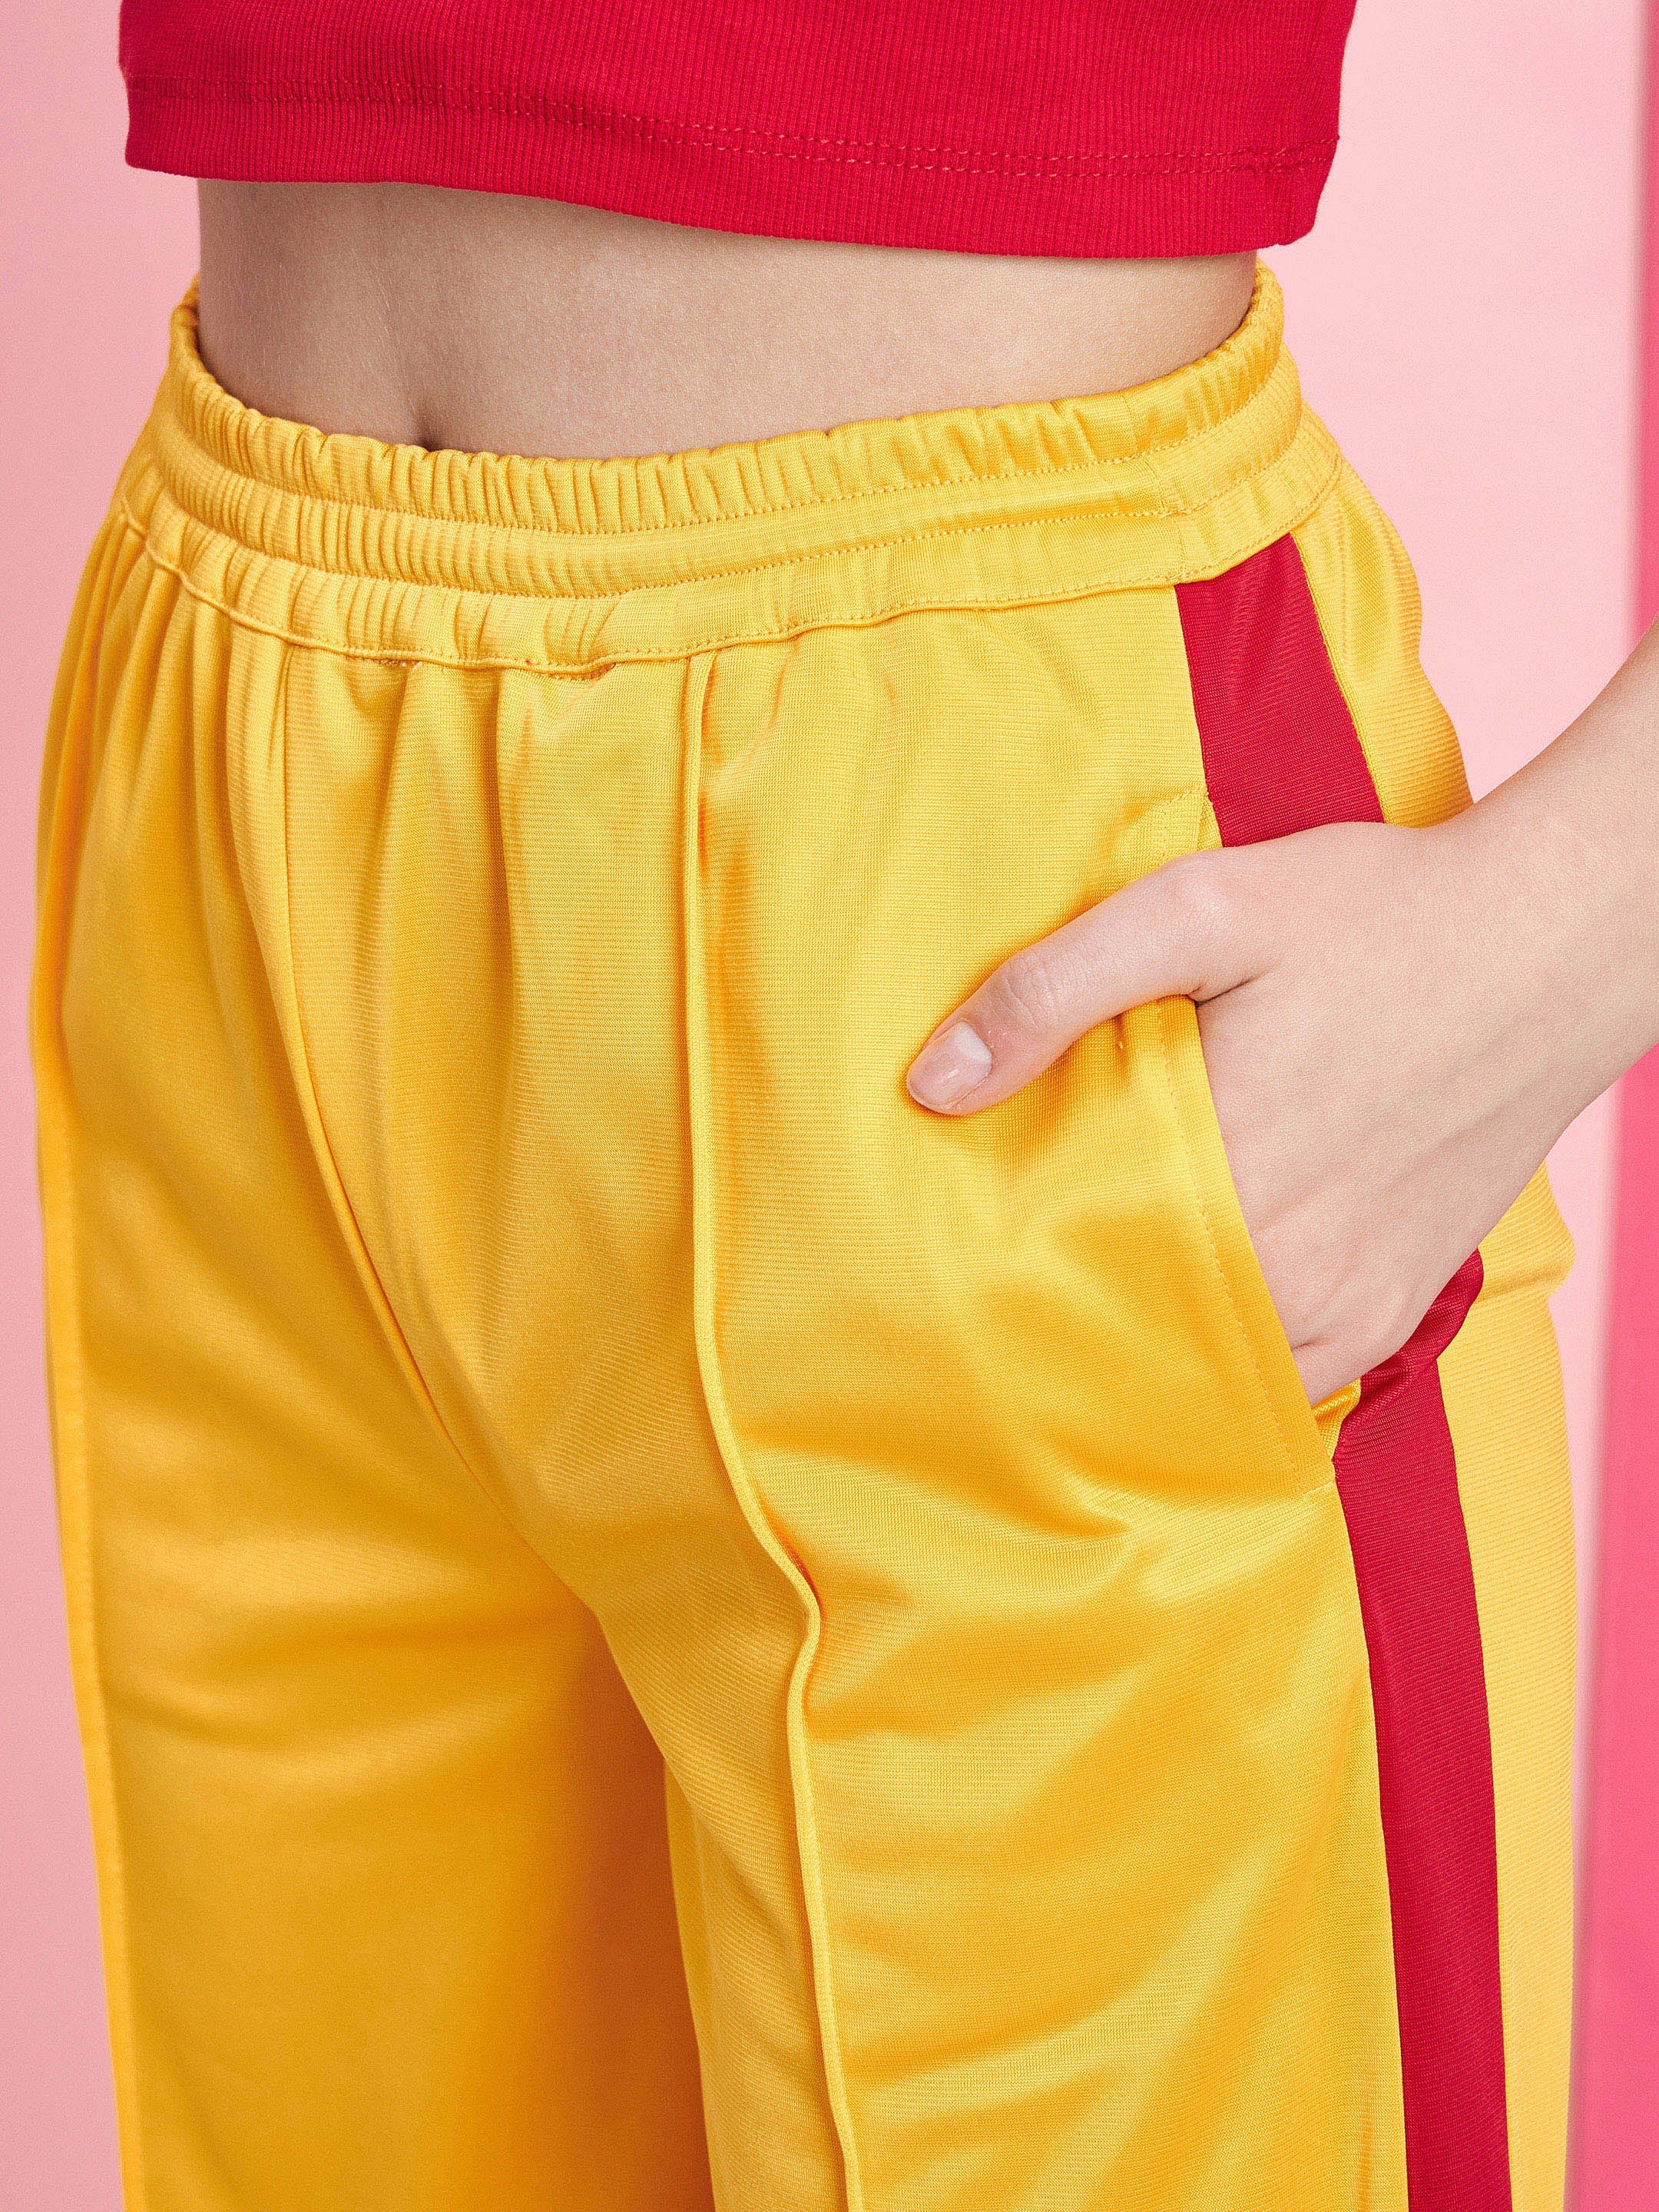 Women's Red Rib Crop Top With Yellow Side Button Track Pants - SASSAFRAS